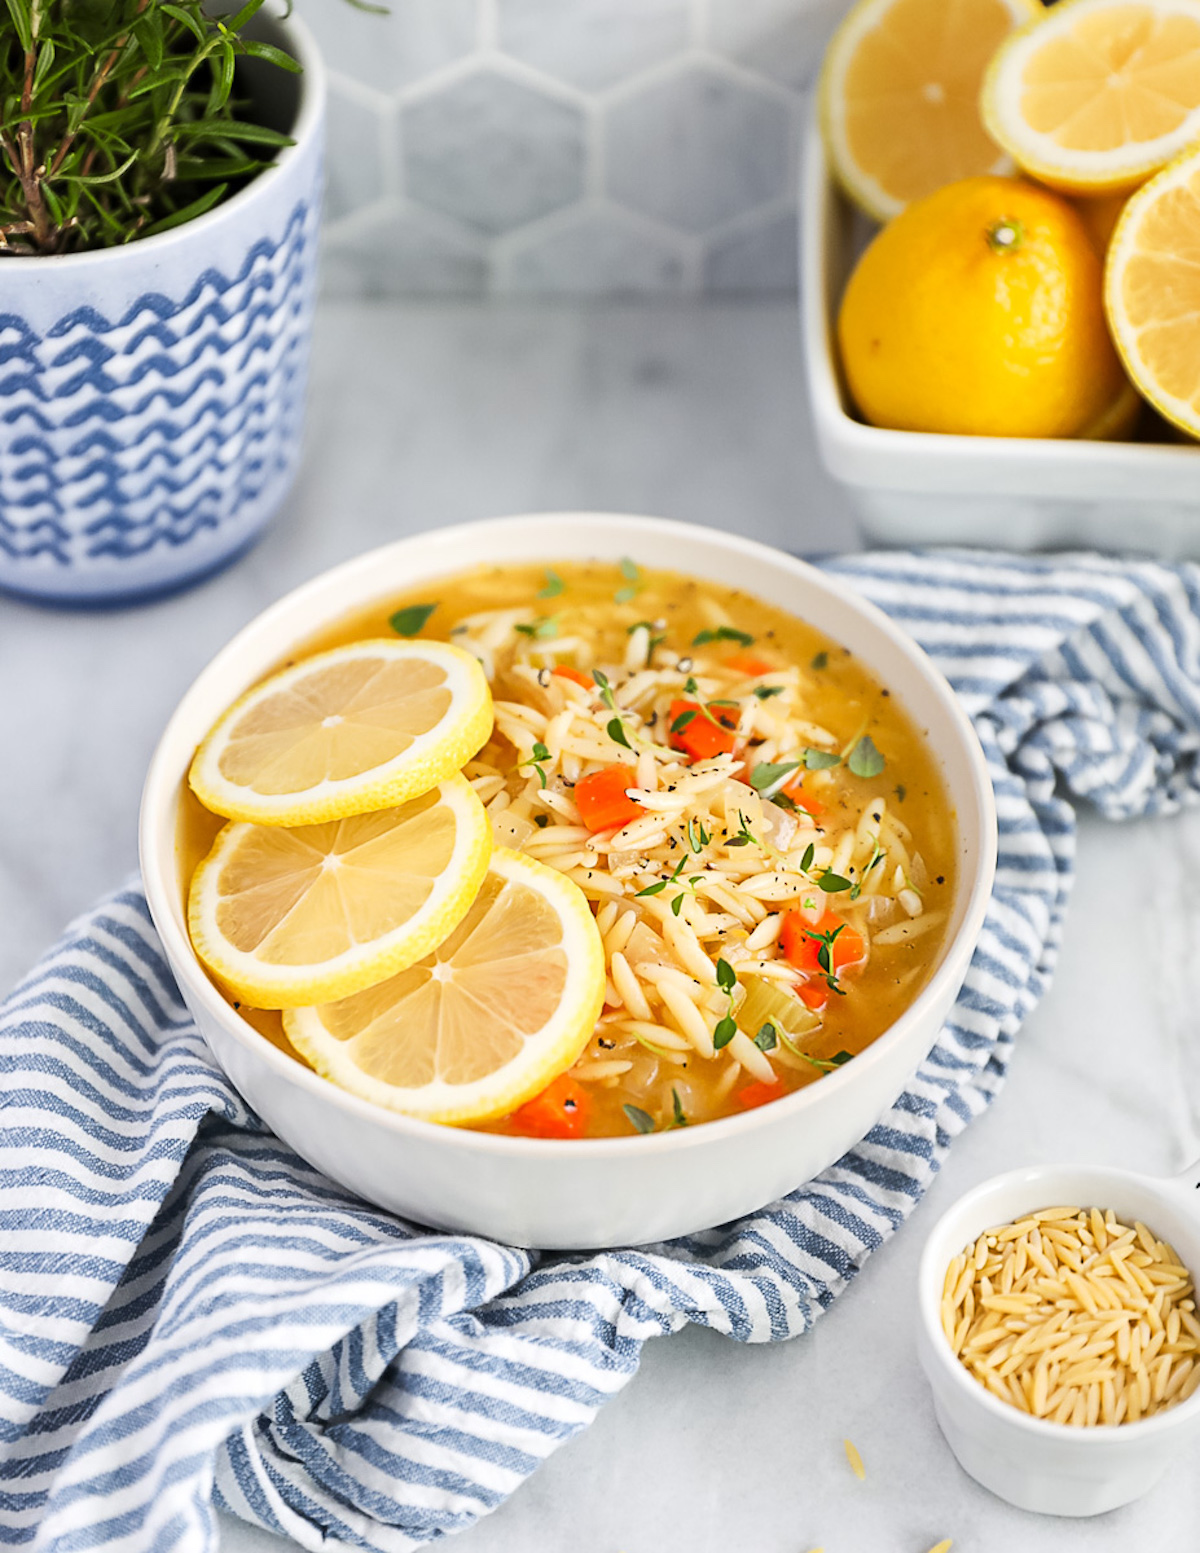 A large bowl filled with soup. There is a pot of fresh herbs and a bowl of lemons, and a measuring cup of orzo in the background.